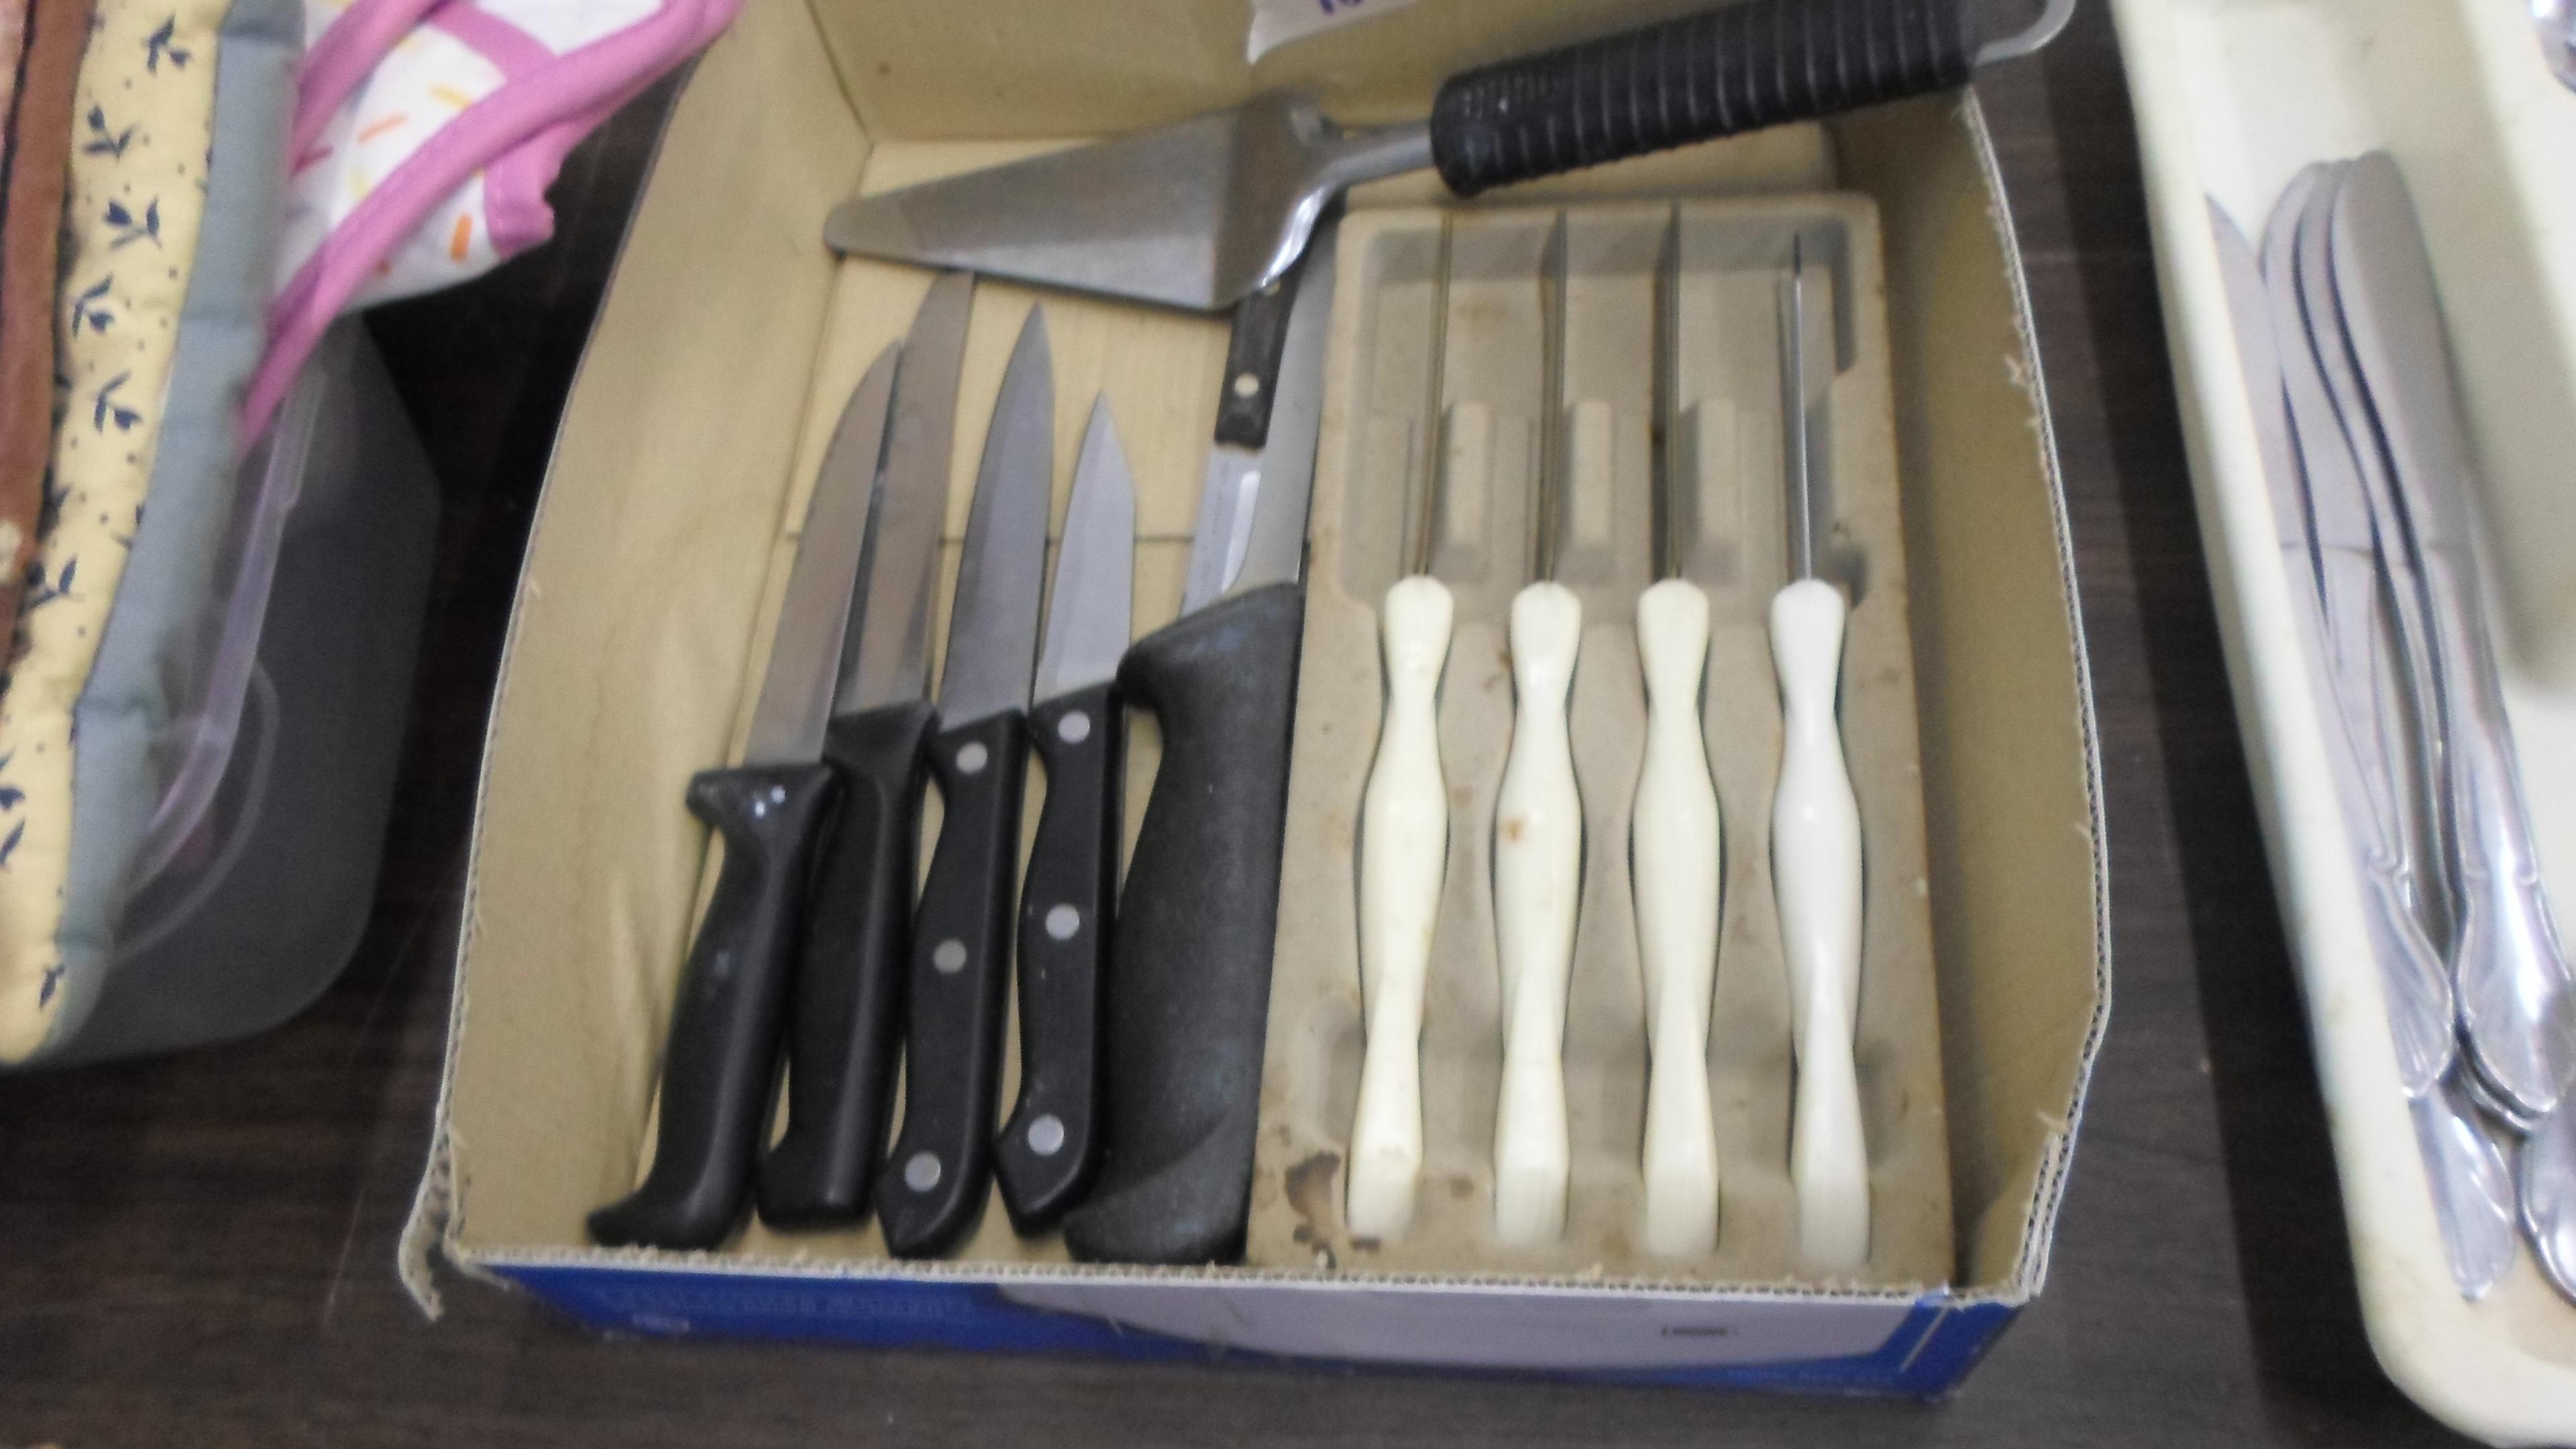 knife lot, various kitchen knives and a cake knife